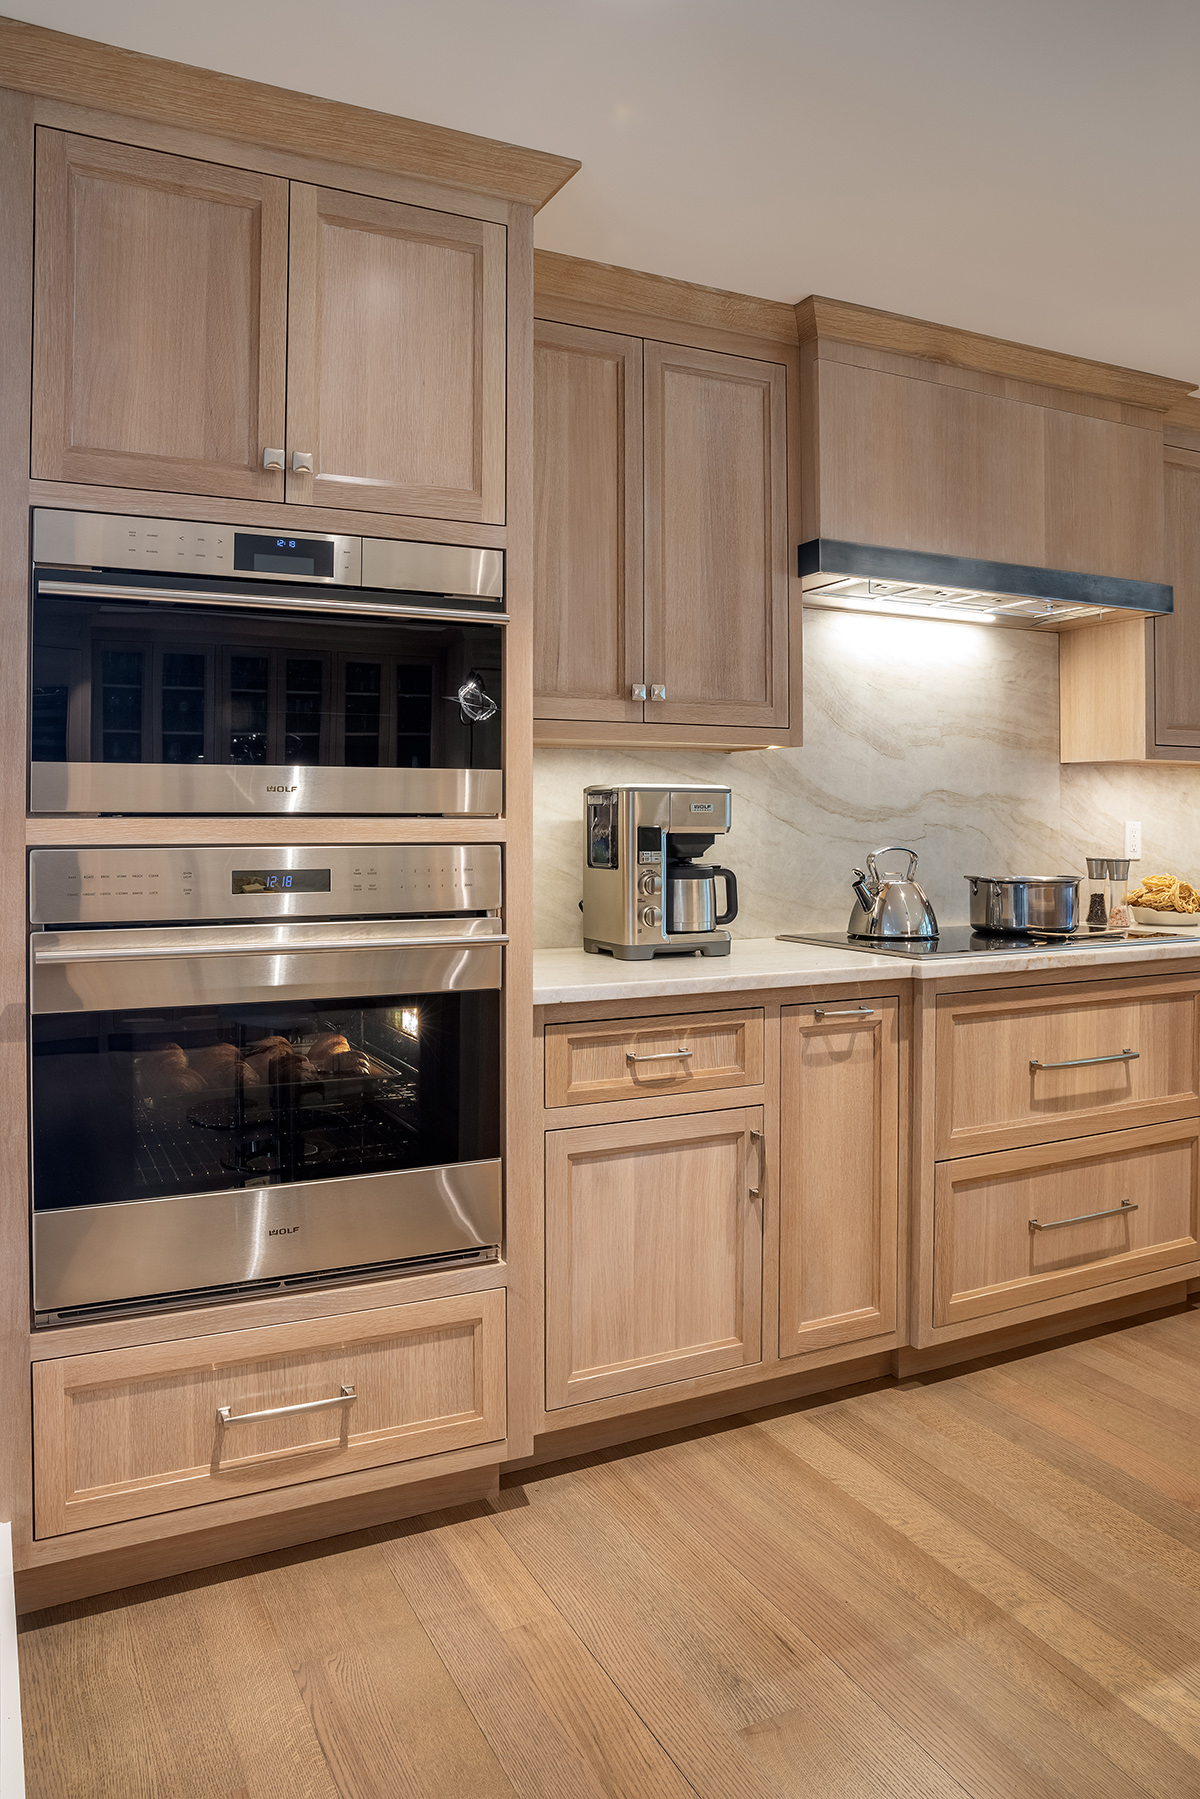 Stovetop and Wall Ovens